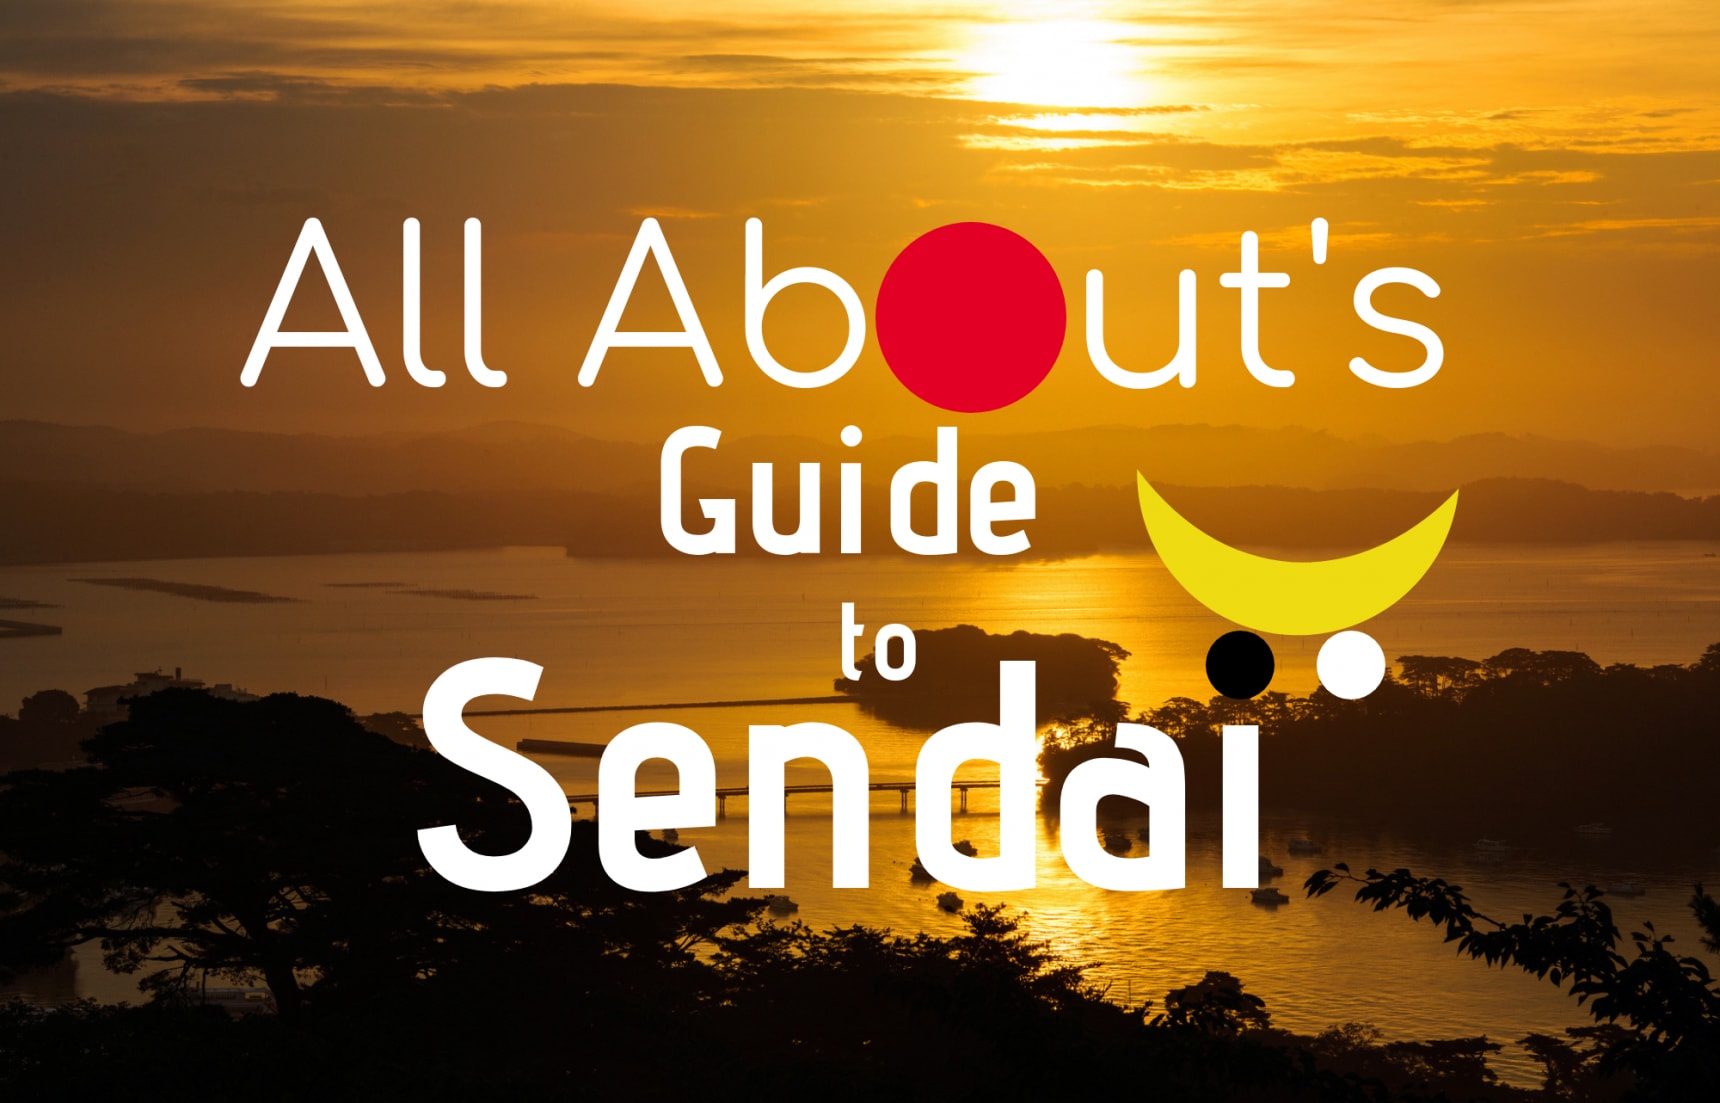 All About's Guide to Sendai